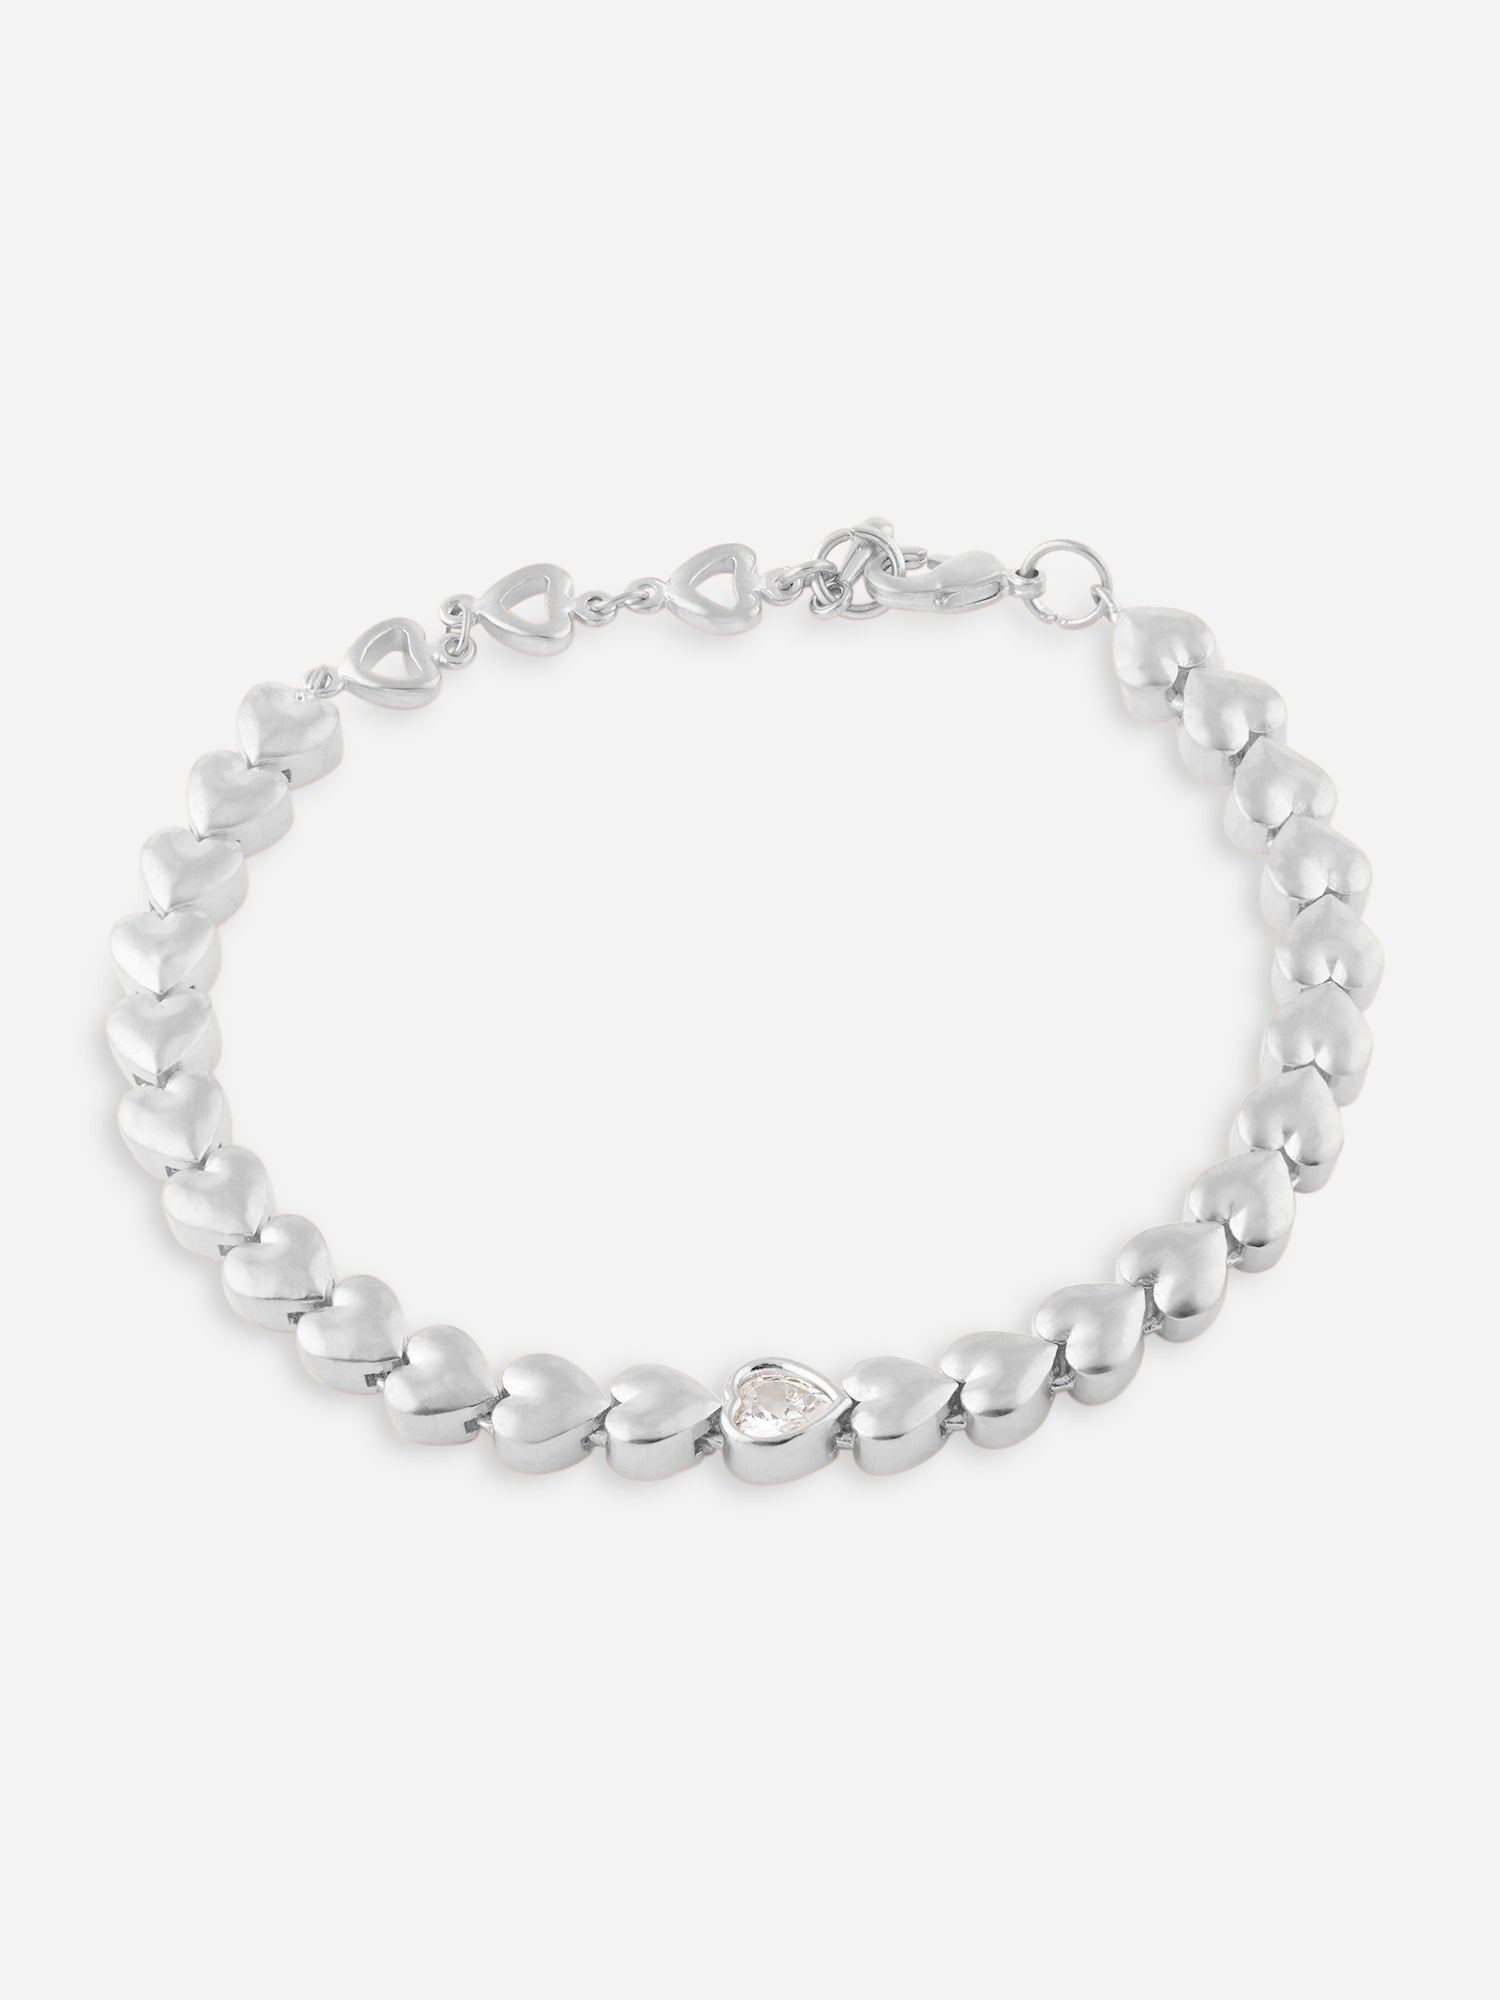 Womens White Gold Plated Heart Solitaire Tennis Bracelet